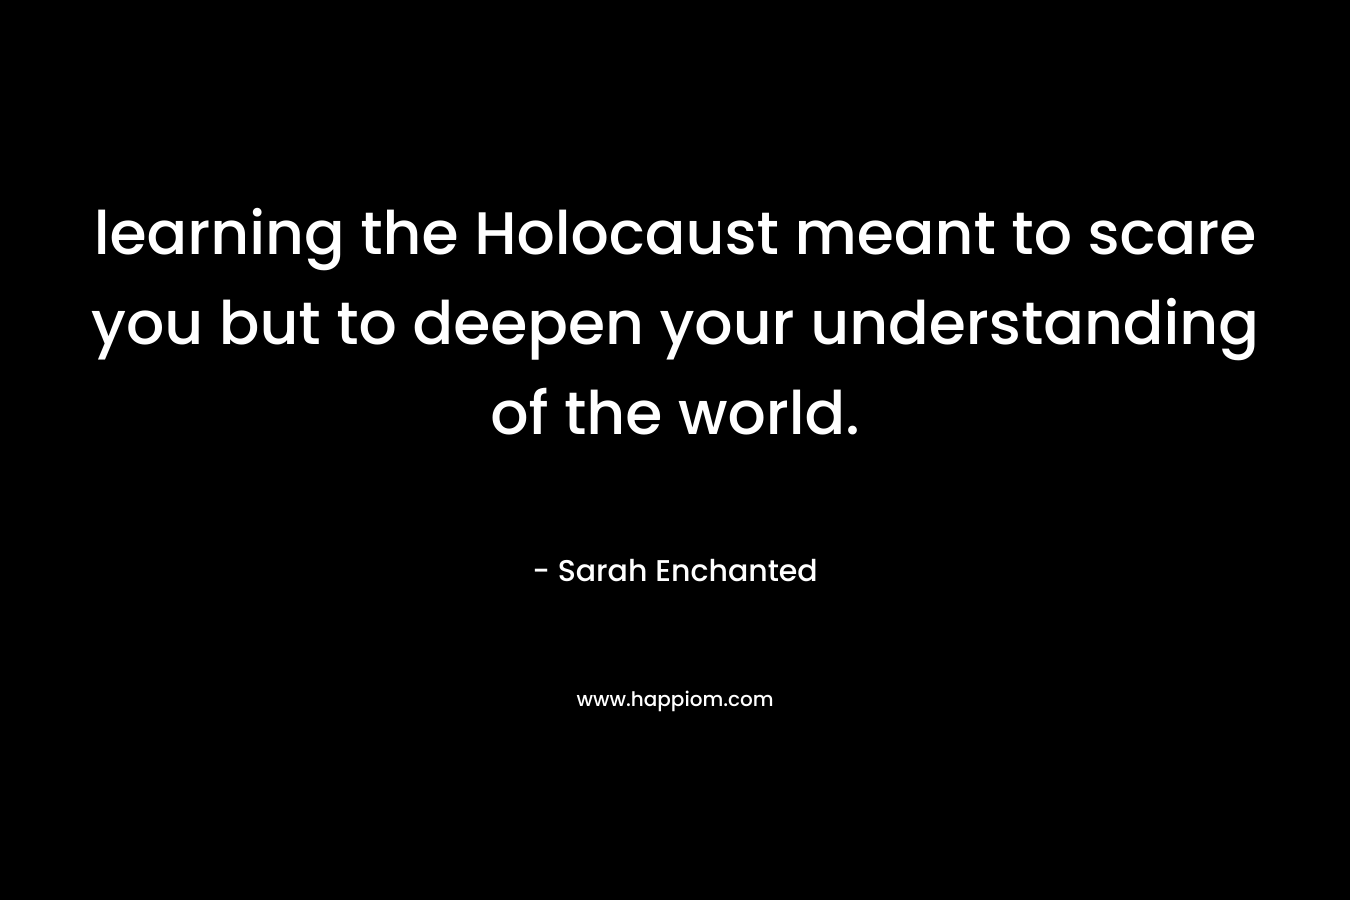 learning the Holocaust meant to scare you but to deepen your understanding of the world.